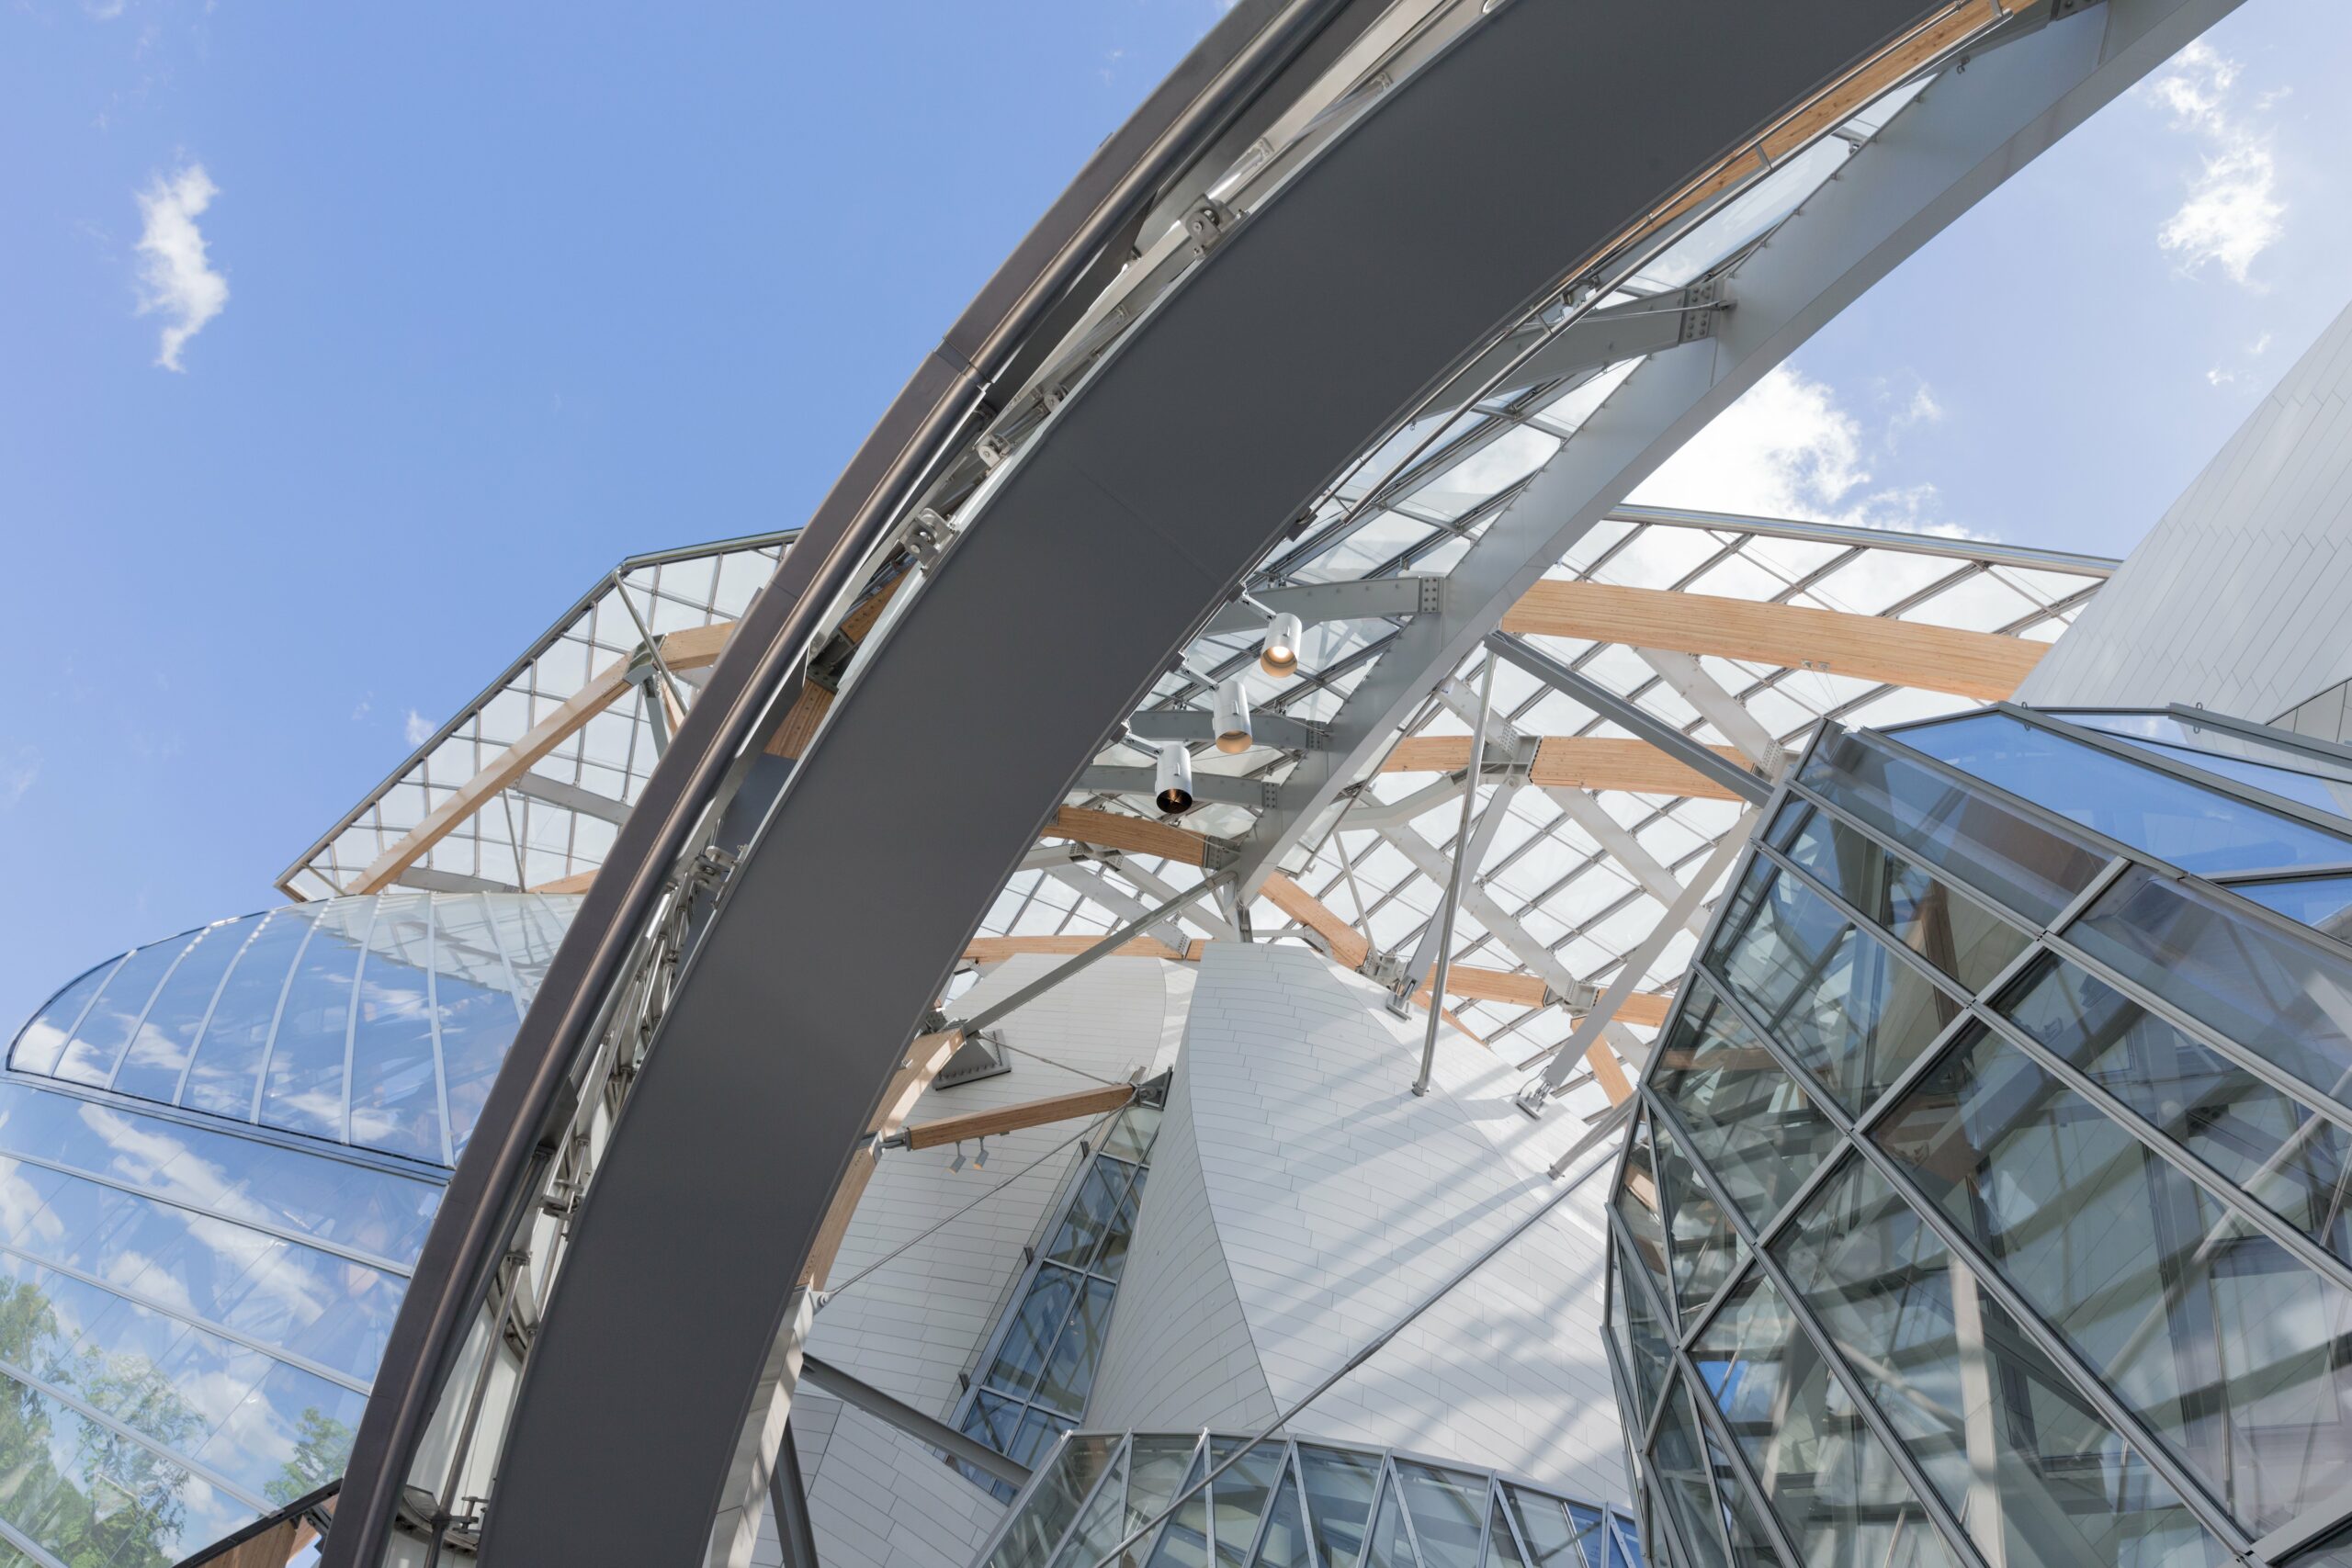 How big is the Fondation Louis Vuitton?